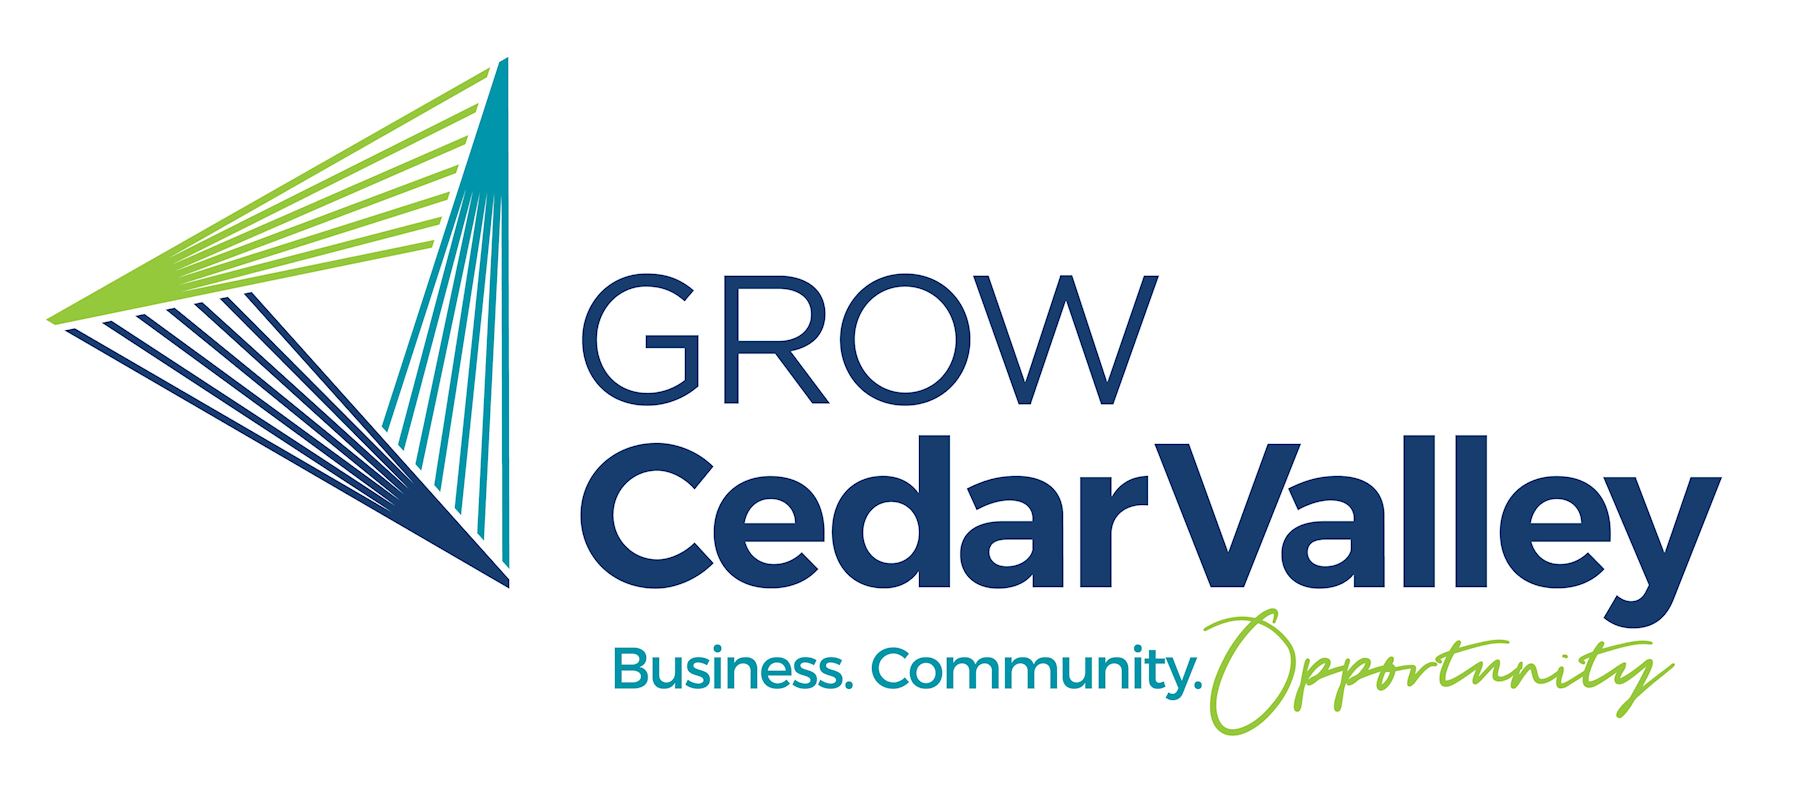 Grow Cedar Valley Now Accepting Nominations for Annual Awards